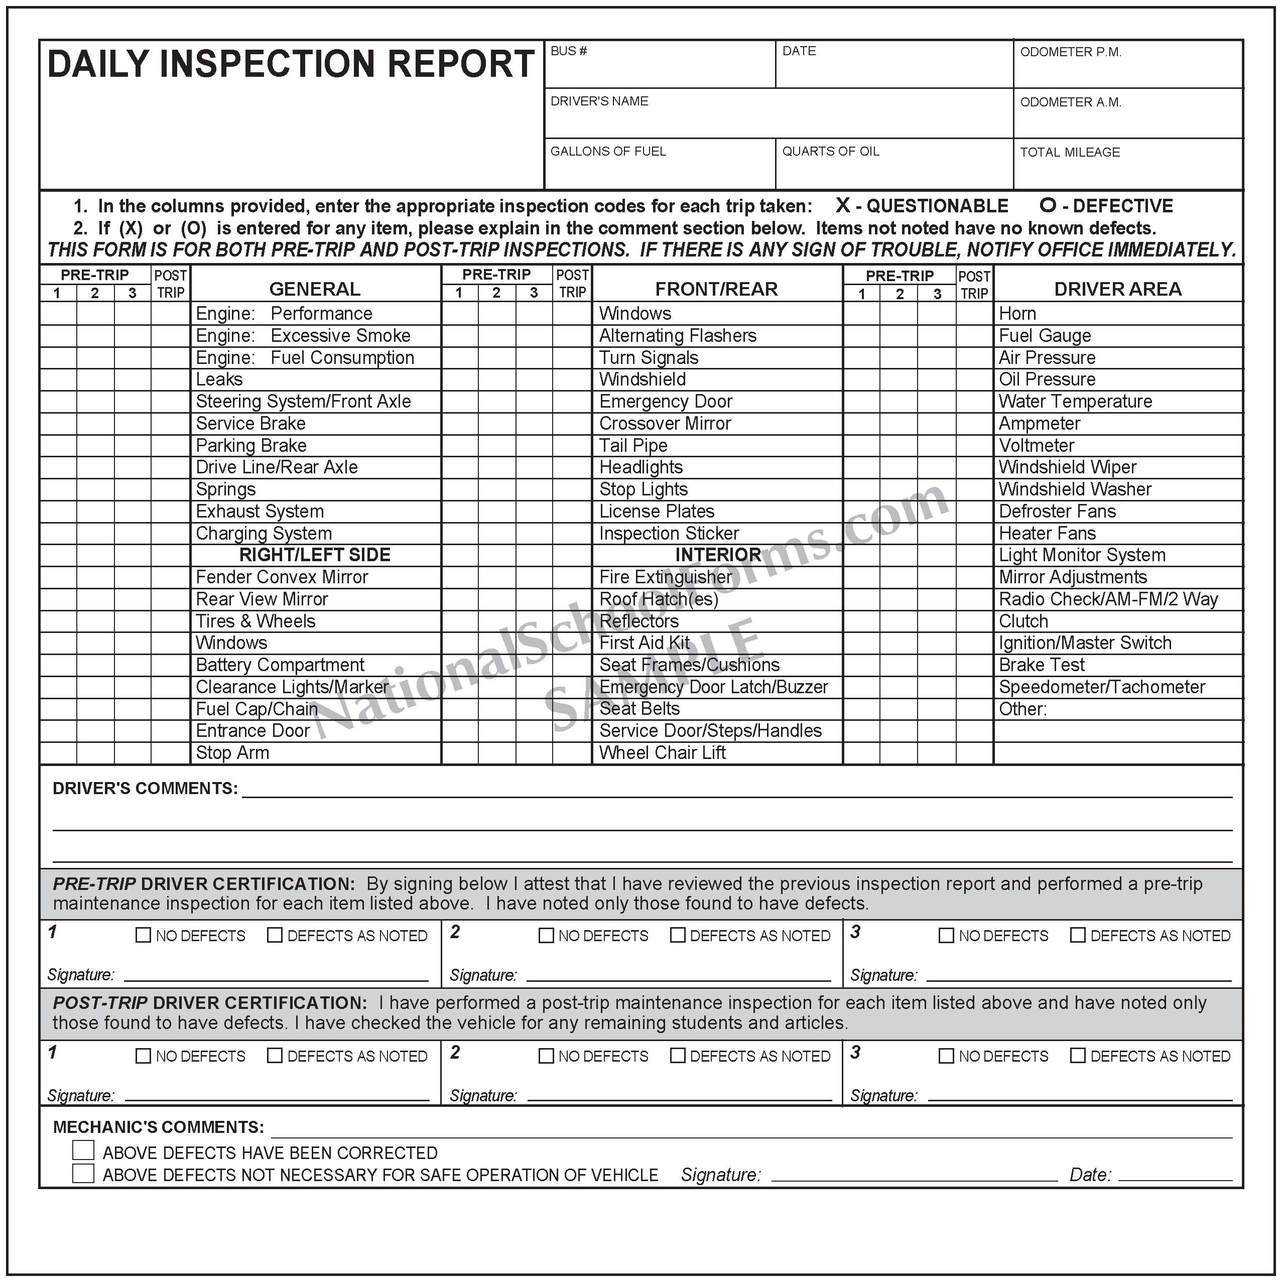 025 Driver Vehicle Inspection Report Template Ideas 217 Within Daily Inspection Report Template